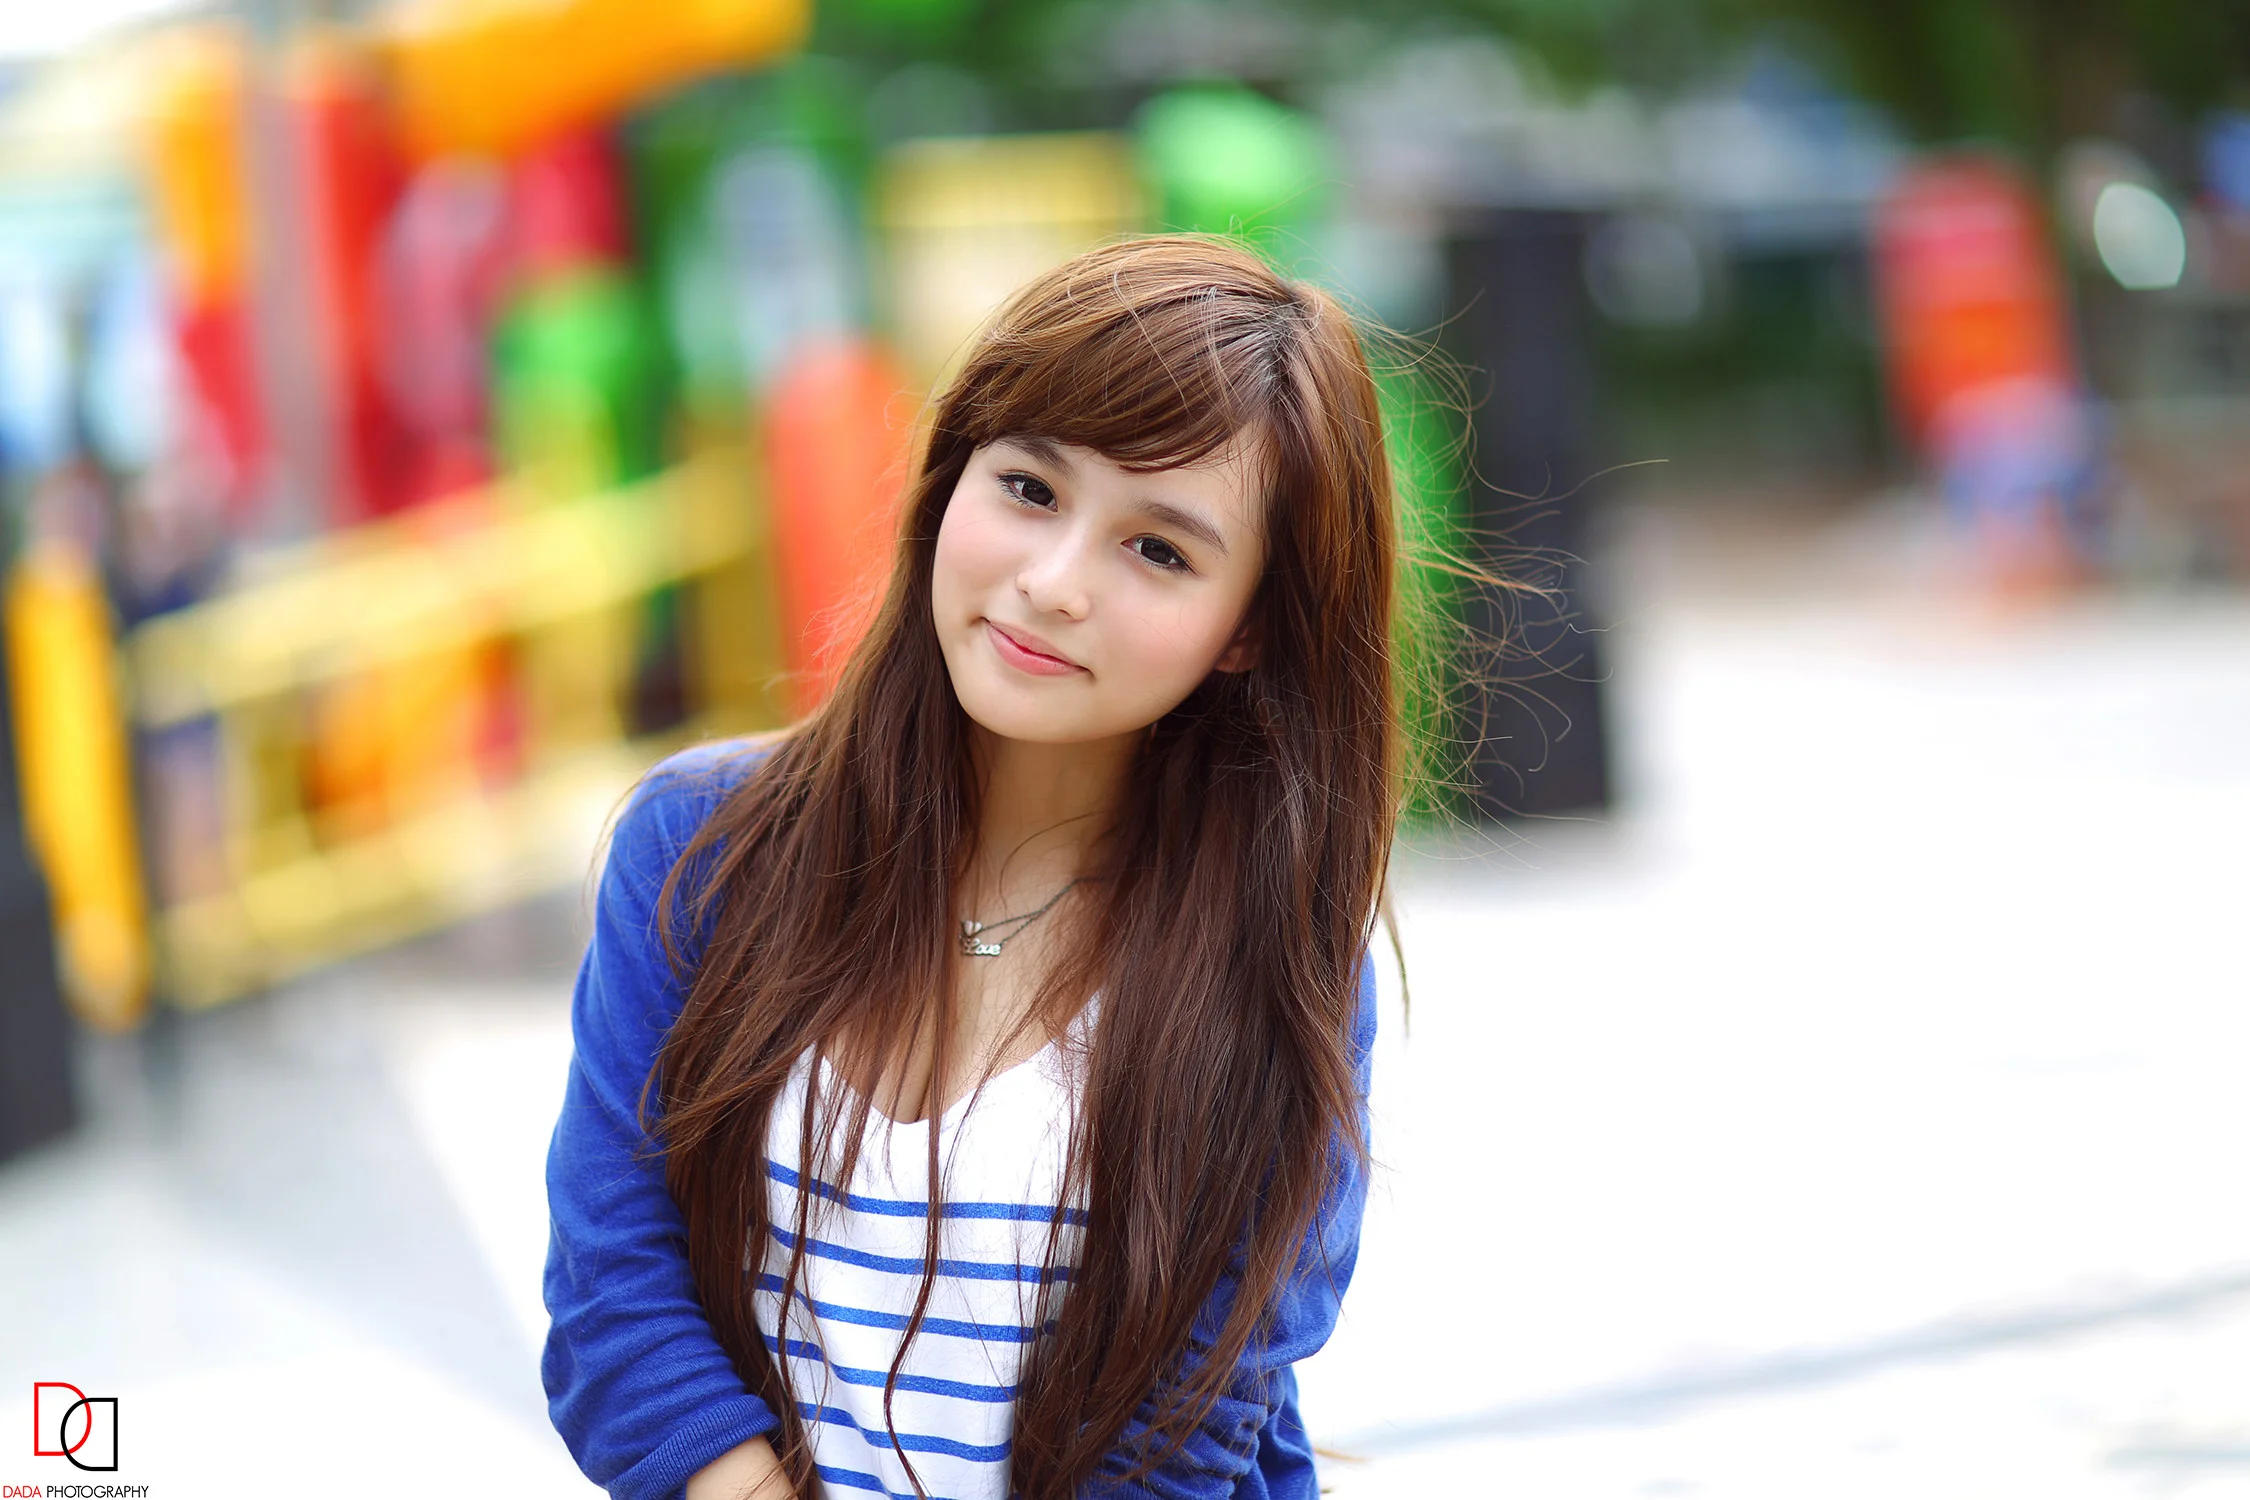 Hot Cute Asian Girl Wallpapers Full HD Free Download 2250Ã 1500 Backgrounds with 2250x150...